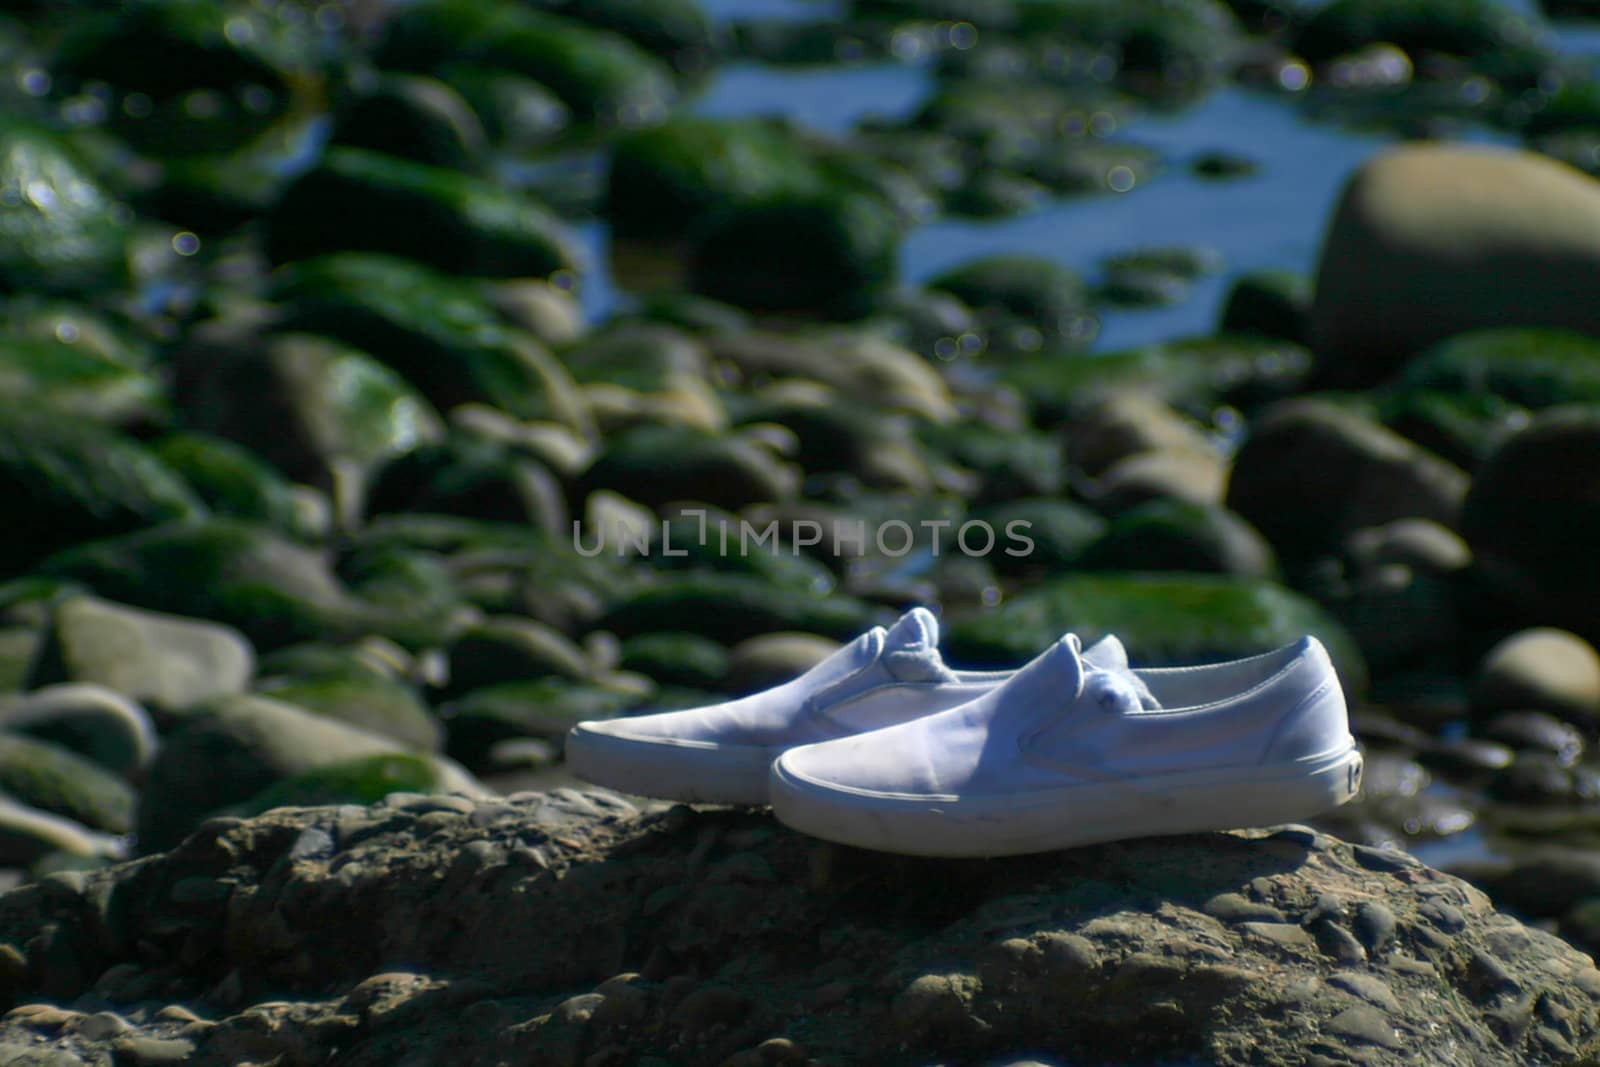 A pair of white shoes left alone on the beach